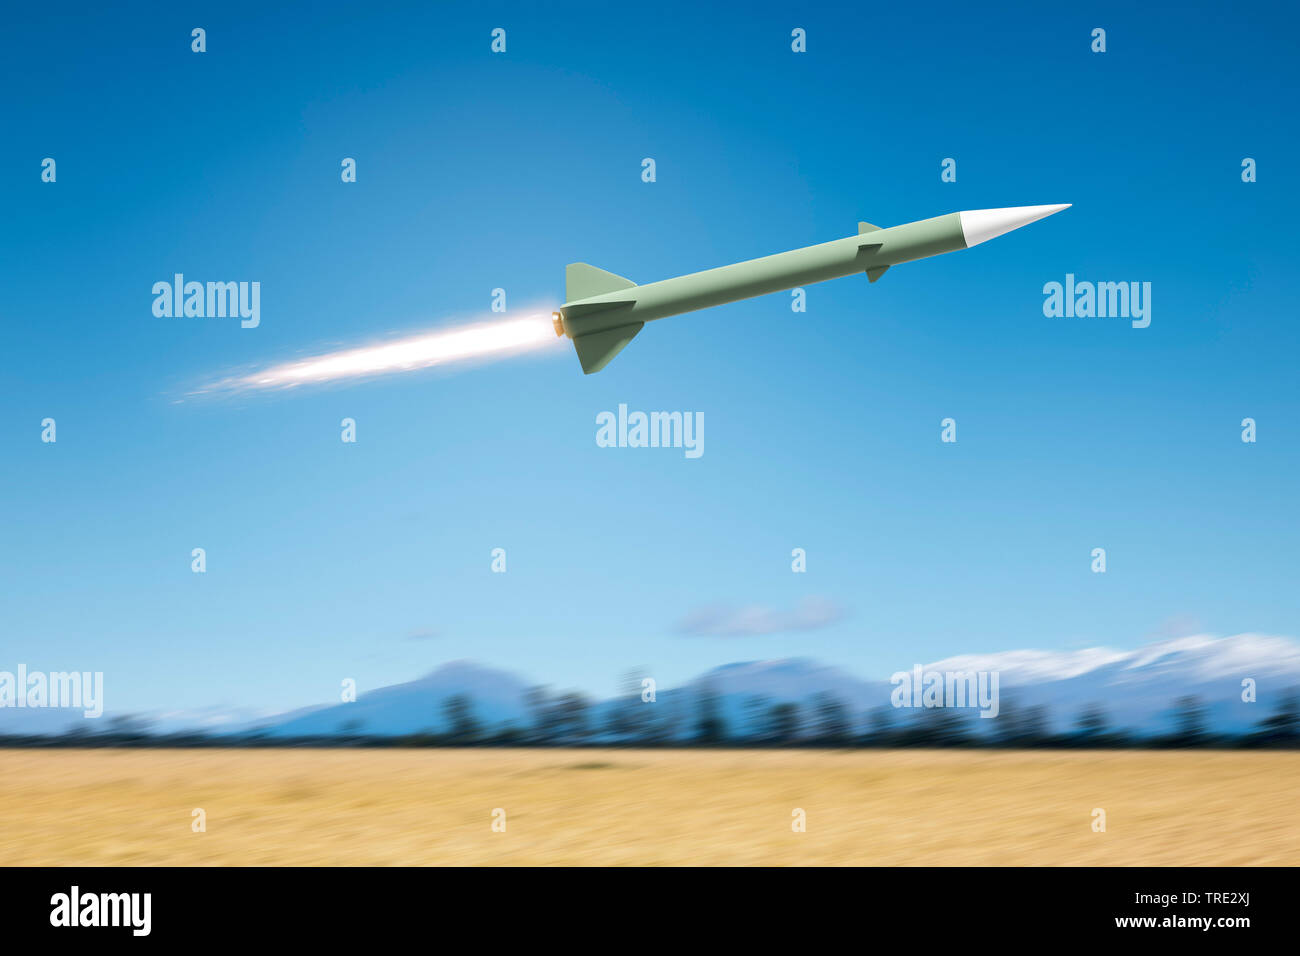 3d illustration of a nuclear rocket bomb flying Stock Photo